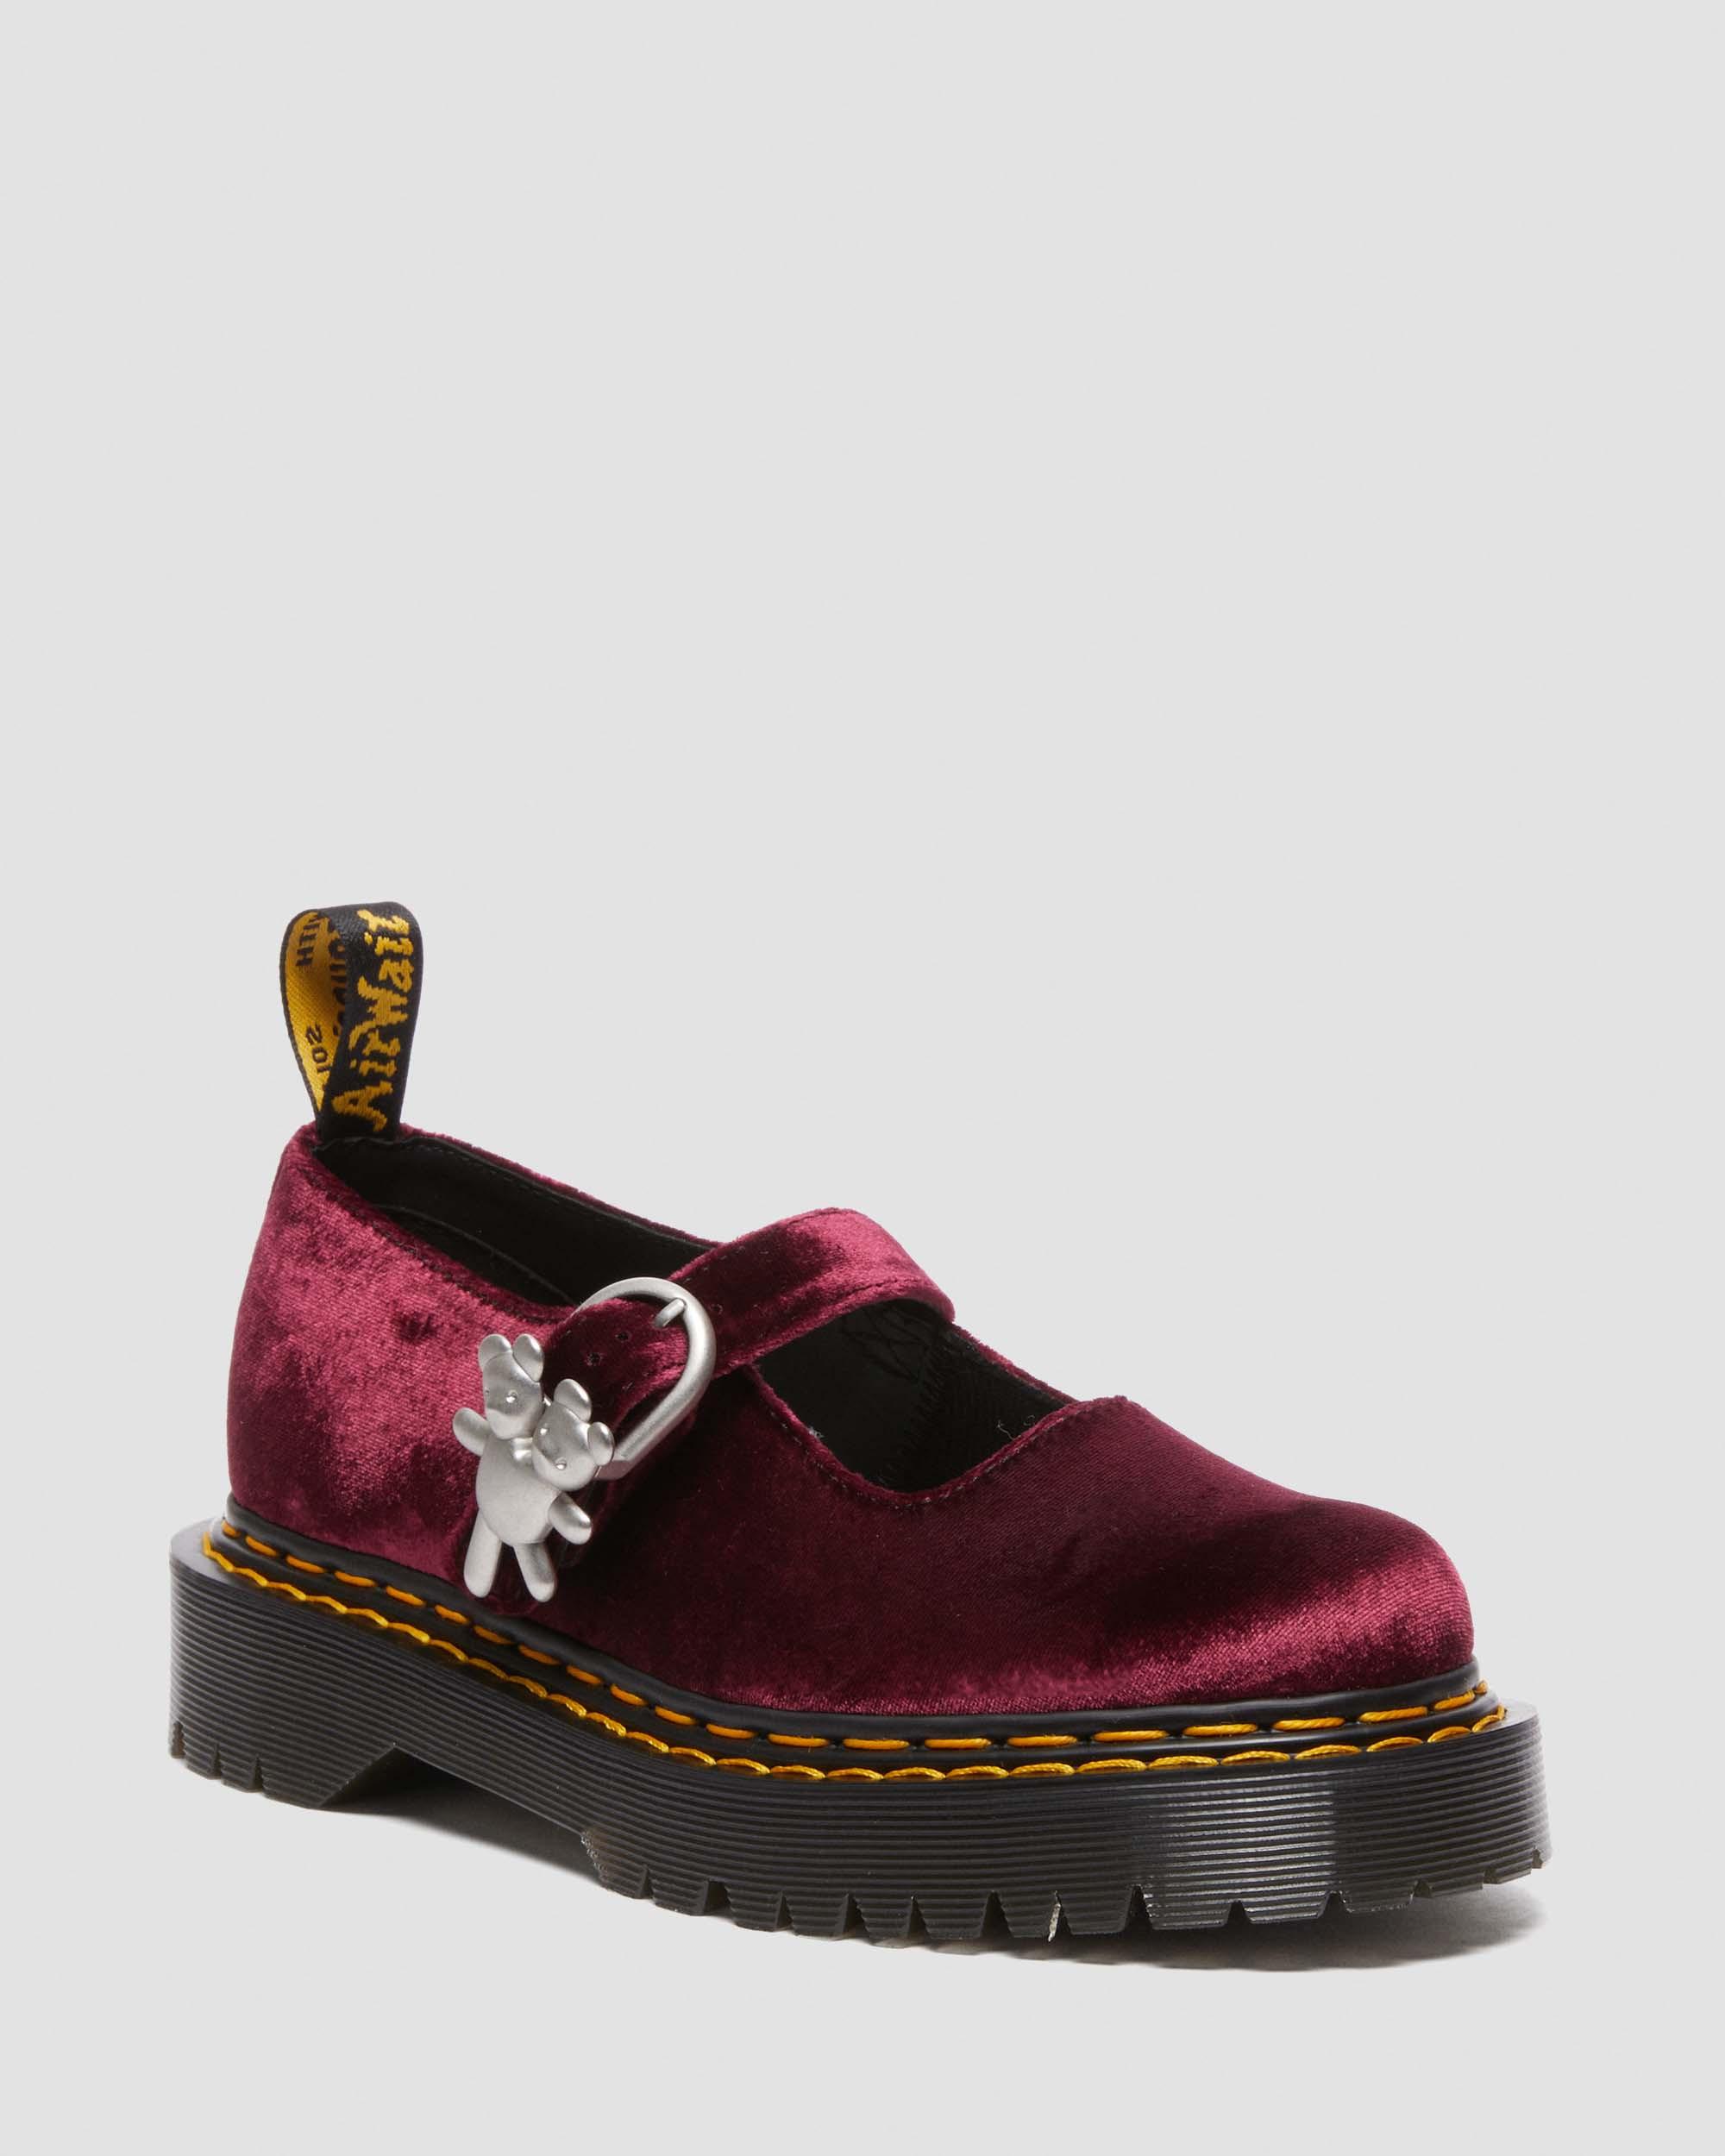 Addina Heaven by Marc Jacobs Velvet Shoes in Cherry Red | Dr. Martens